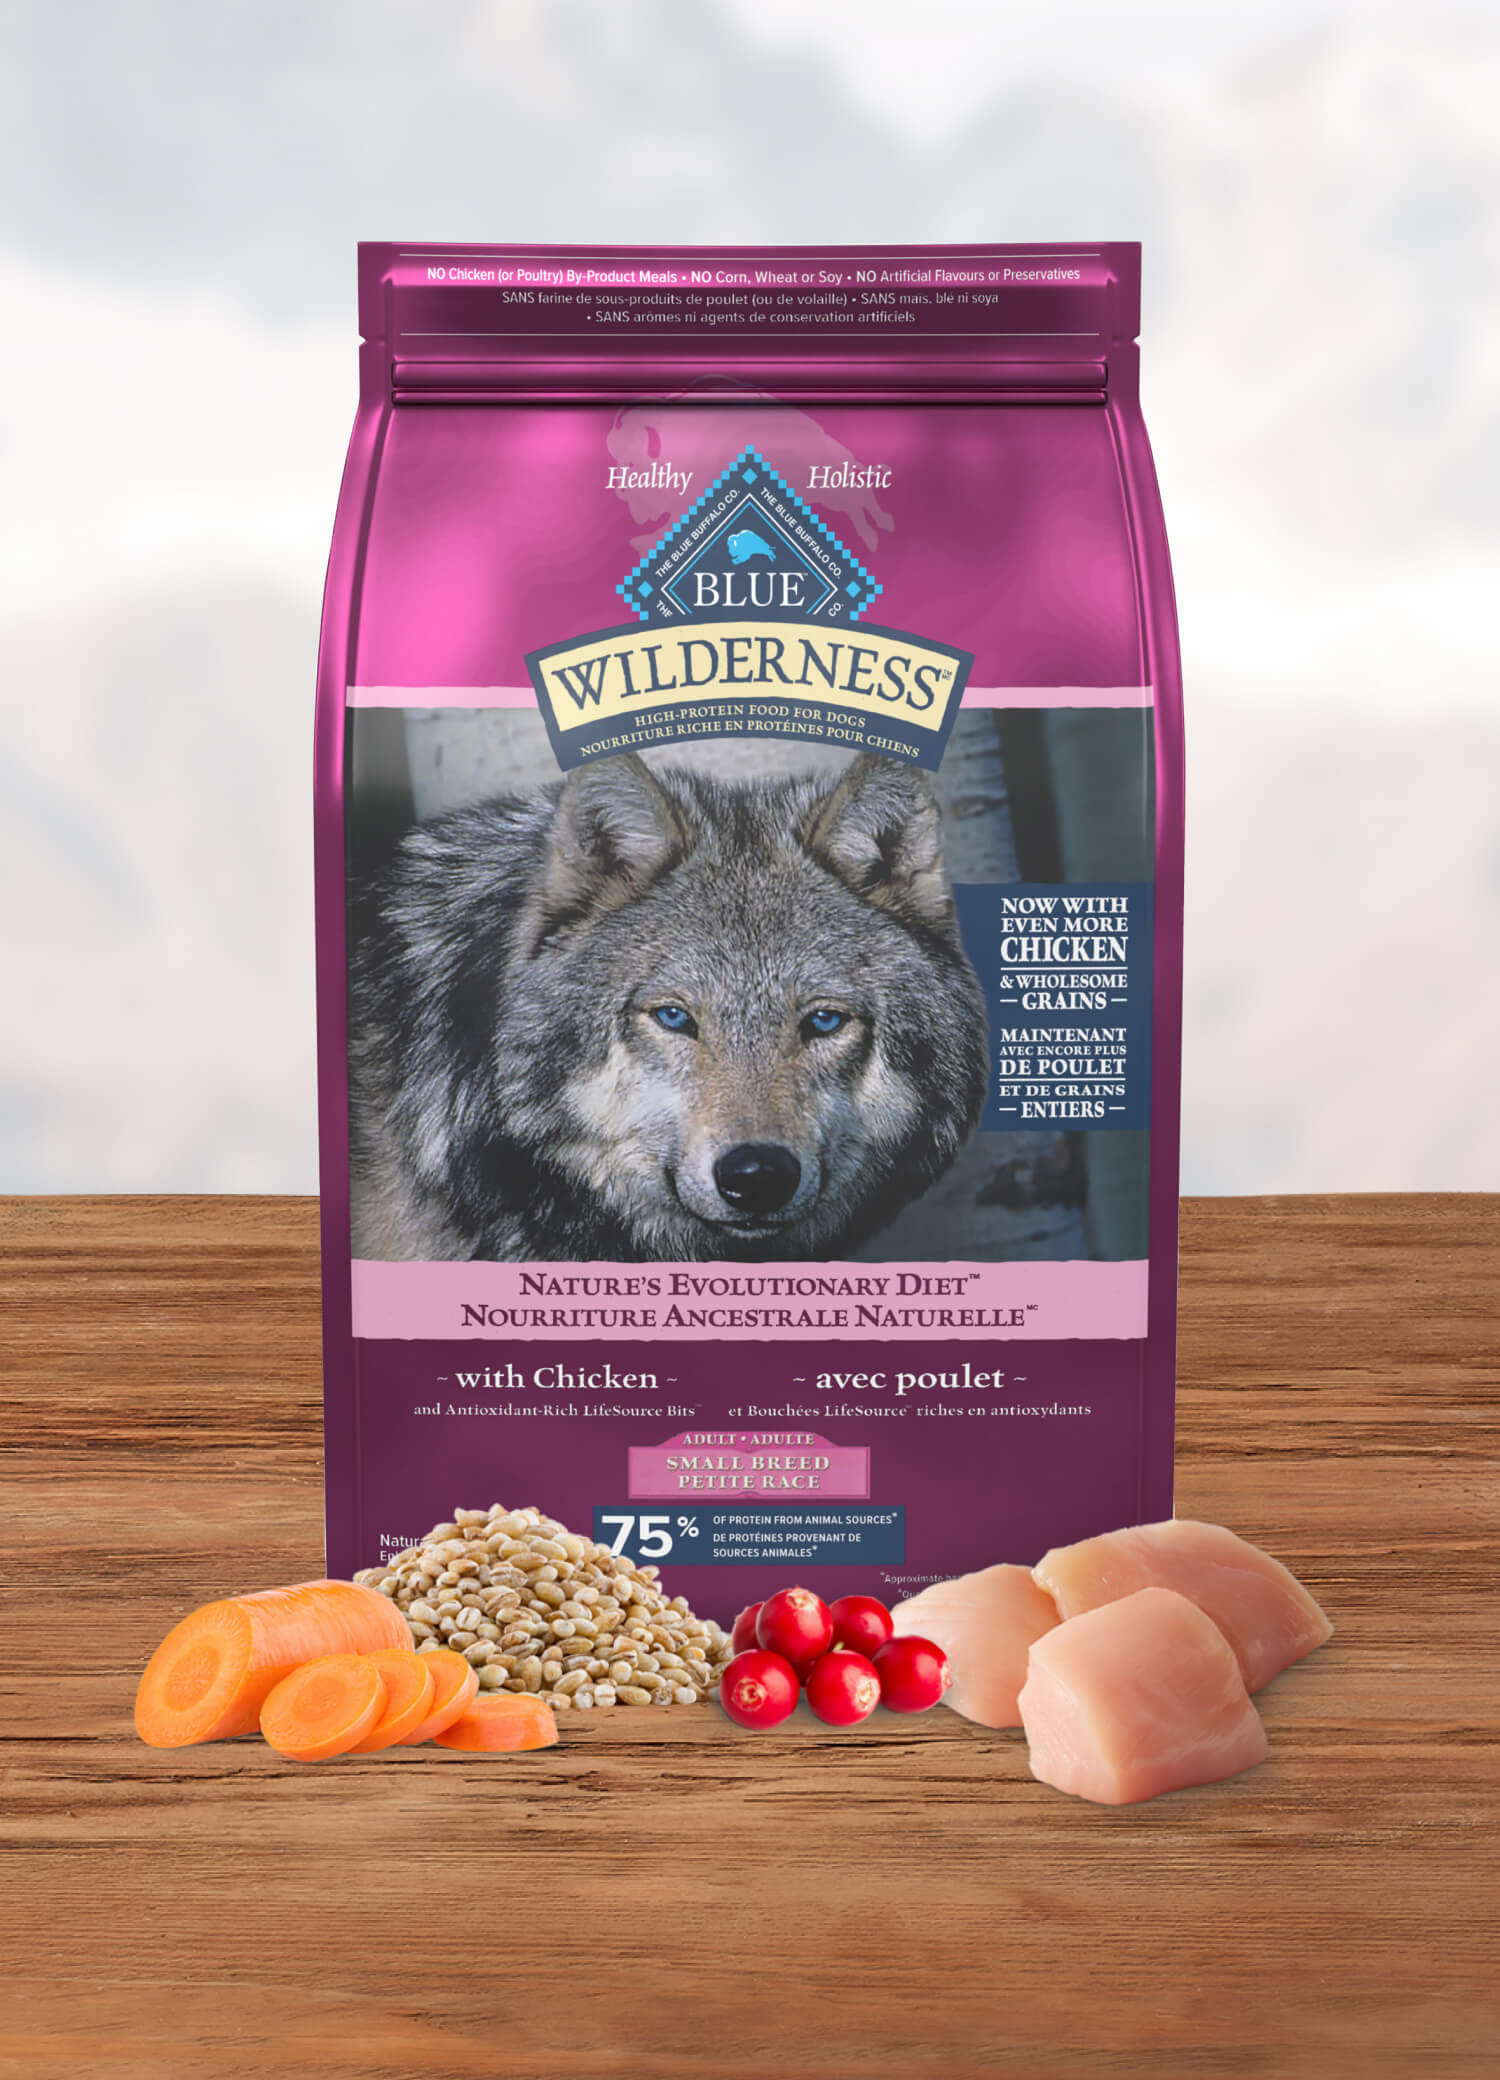 Wilderness Small Breed Chicken Adult Dog Food Bag